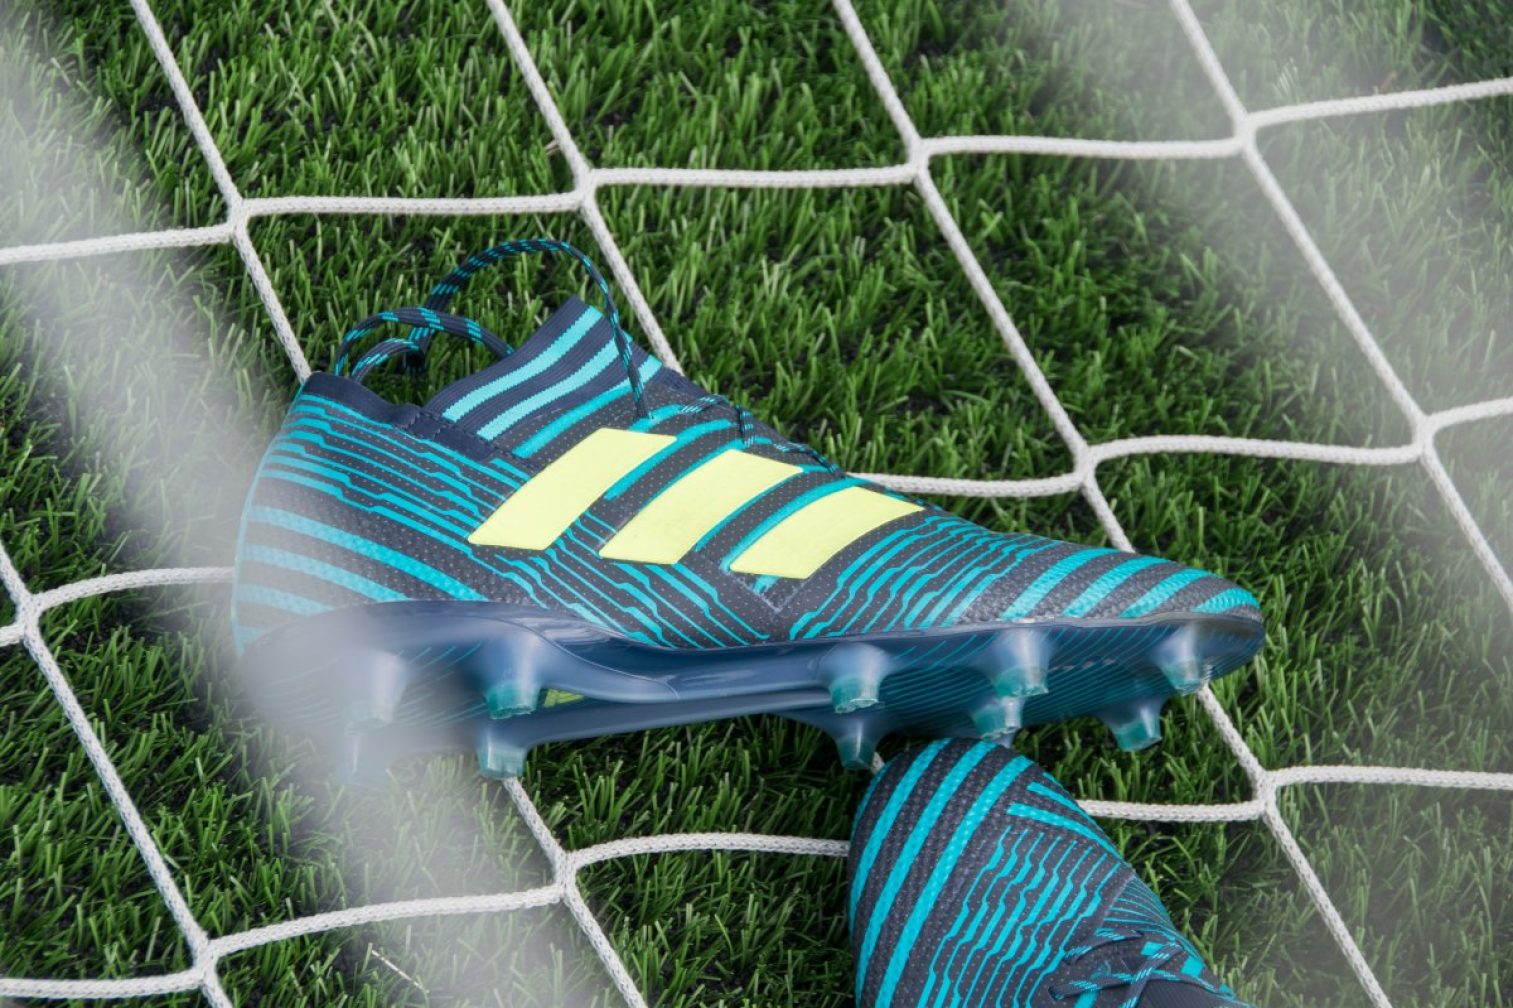 Football cleats in the net.